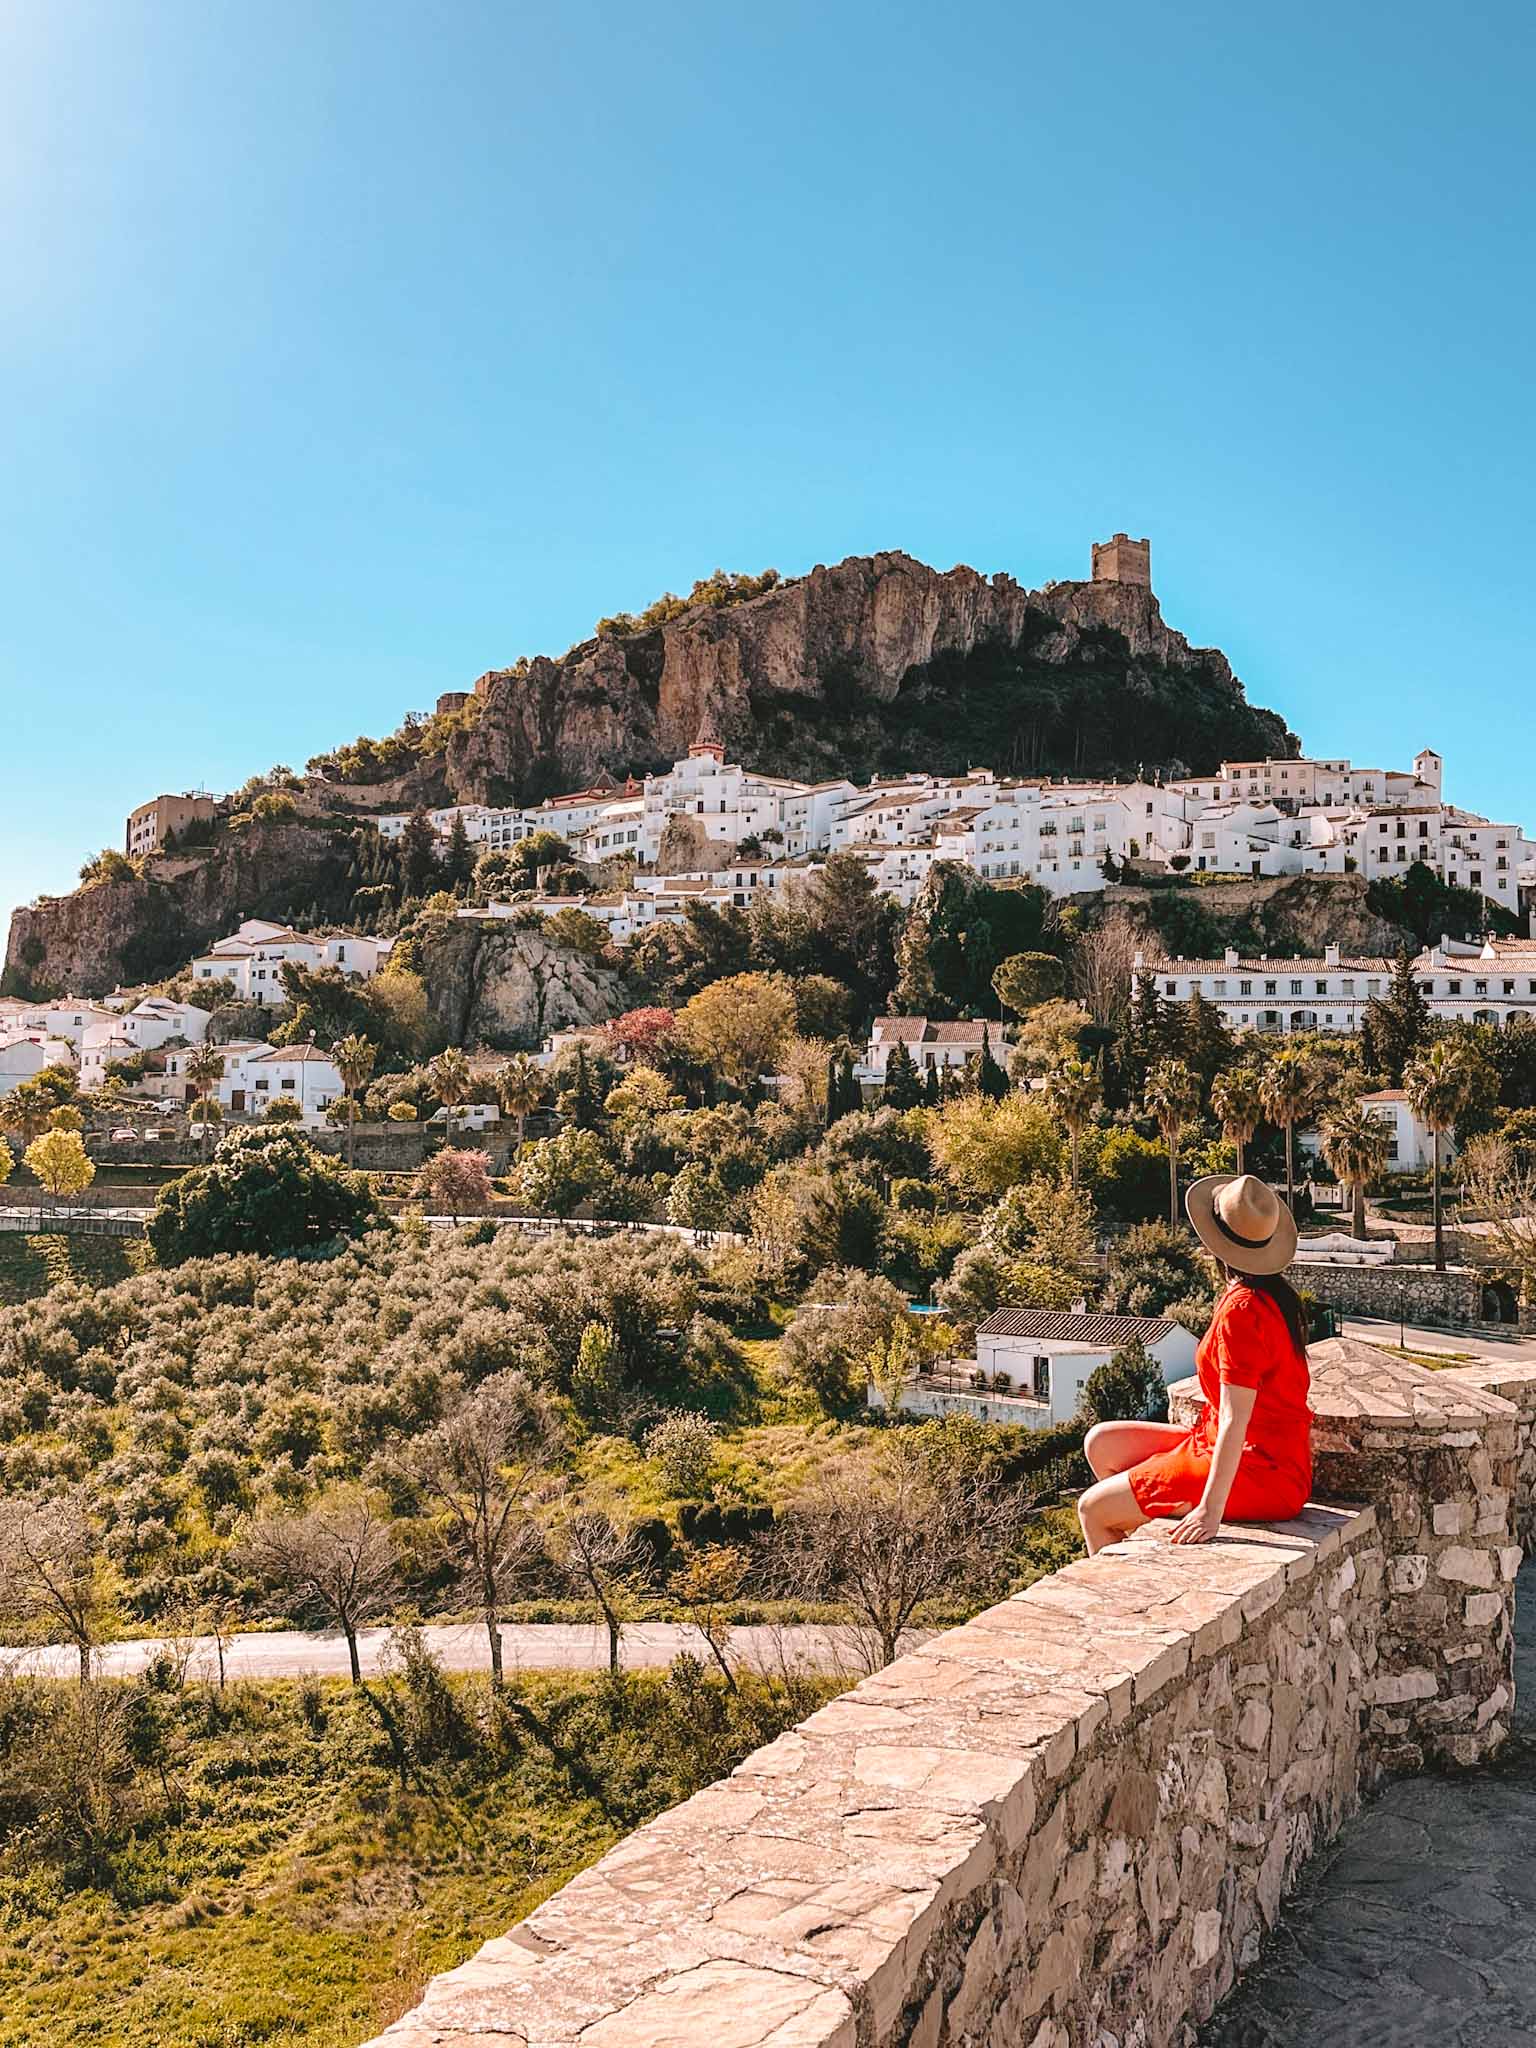 Most beautiful whitewashed villages and unique towns in Andalusia, Spain - Zahara de la Sierra